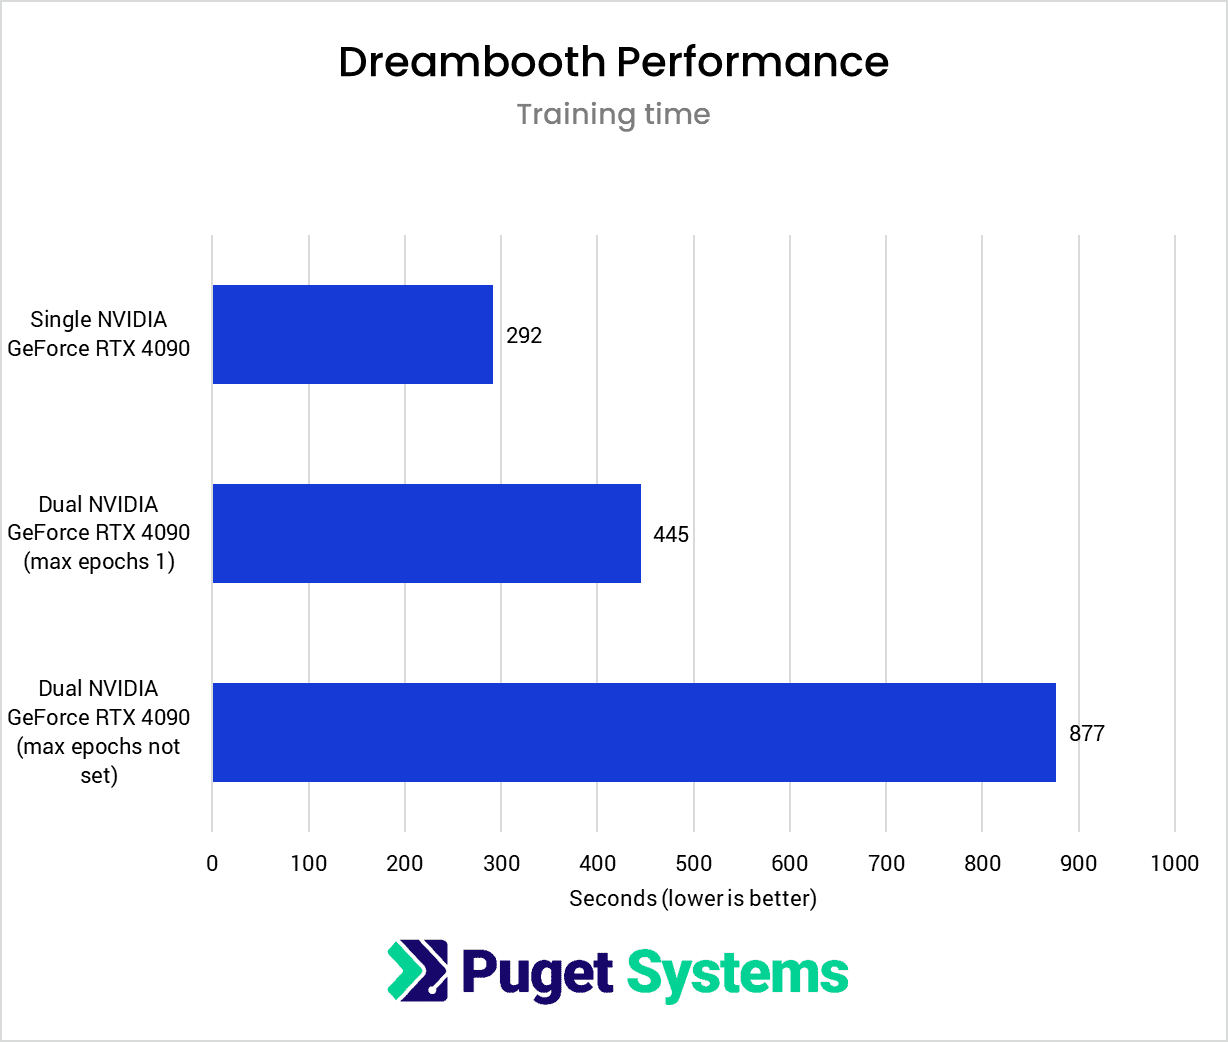 Dreambooth Performance in seconds